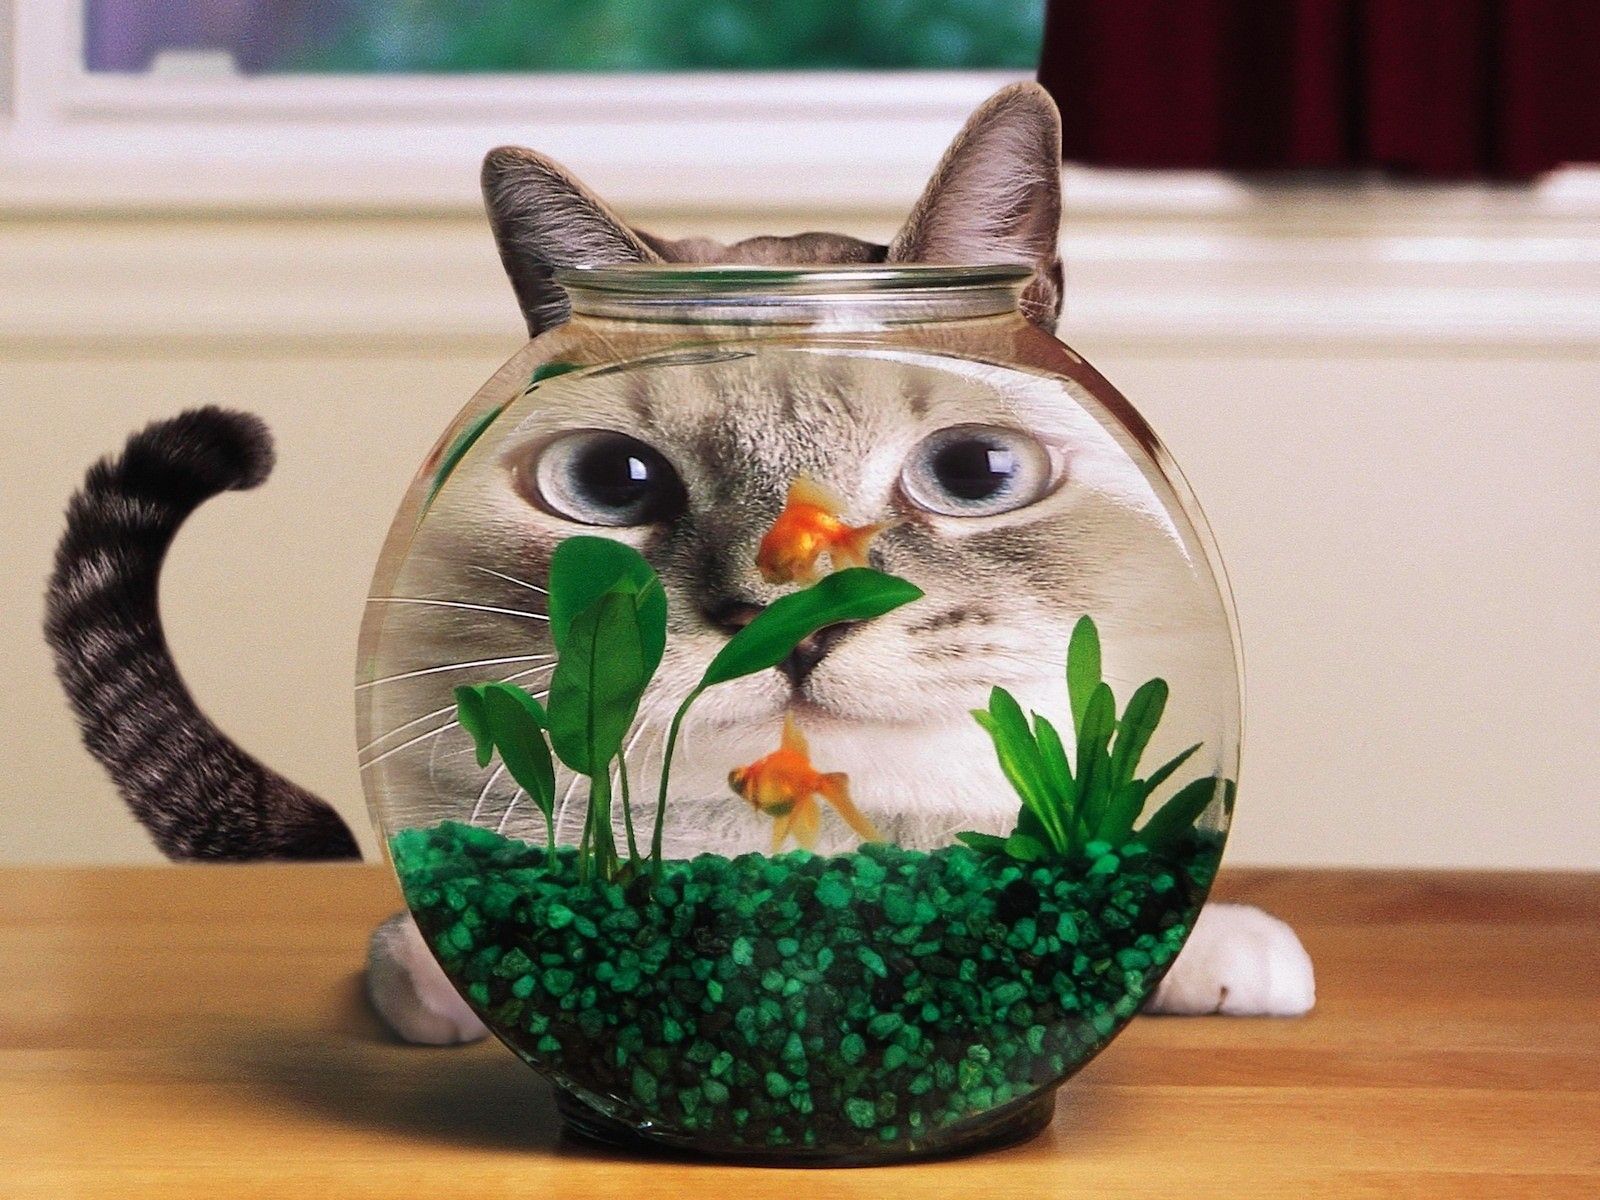 Funny Cat And Fish Wallpaper in Animals PicsPaper.com. Funny cat wallpaper, Cute funny animals, Funny cat photo